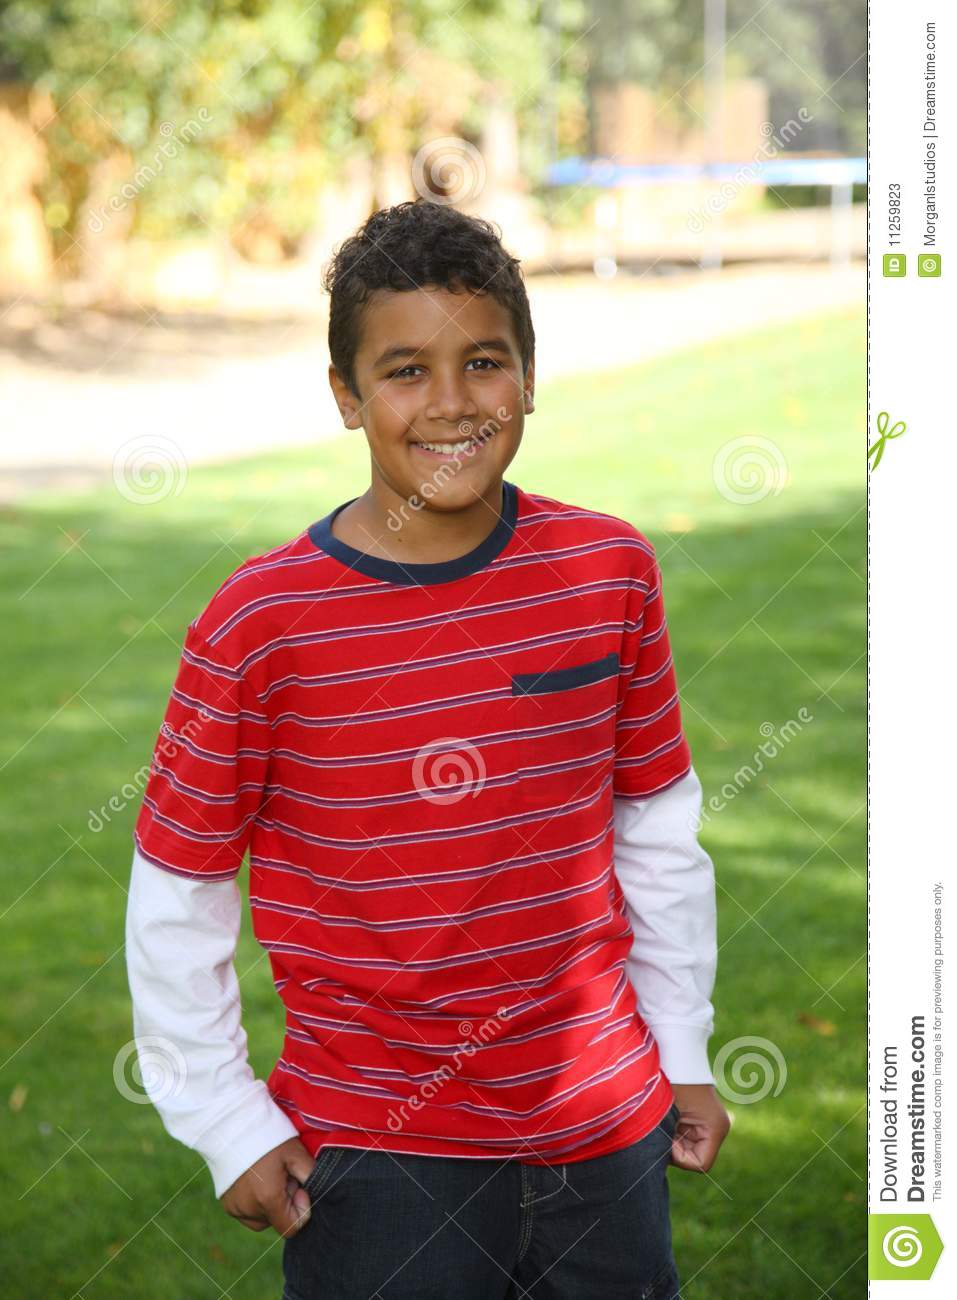 Portrait Of 11 Year Old Boy Outdoors Stock Photos   Image  11259823